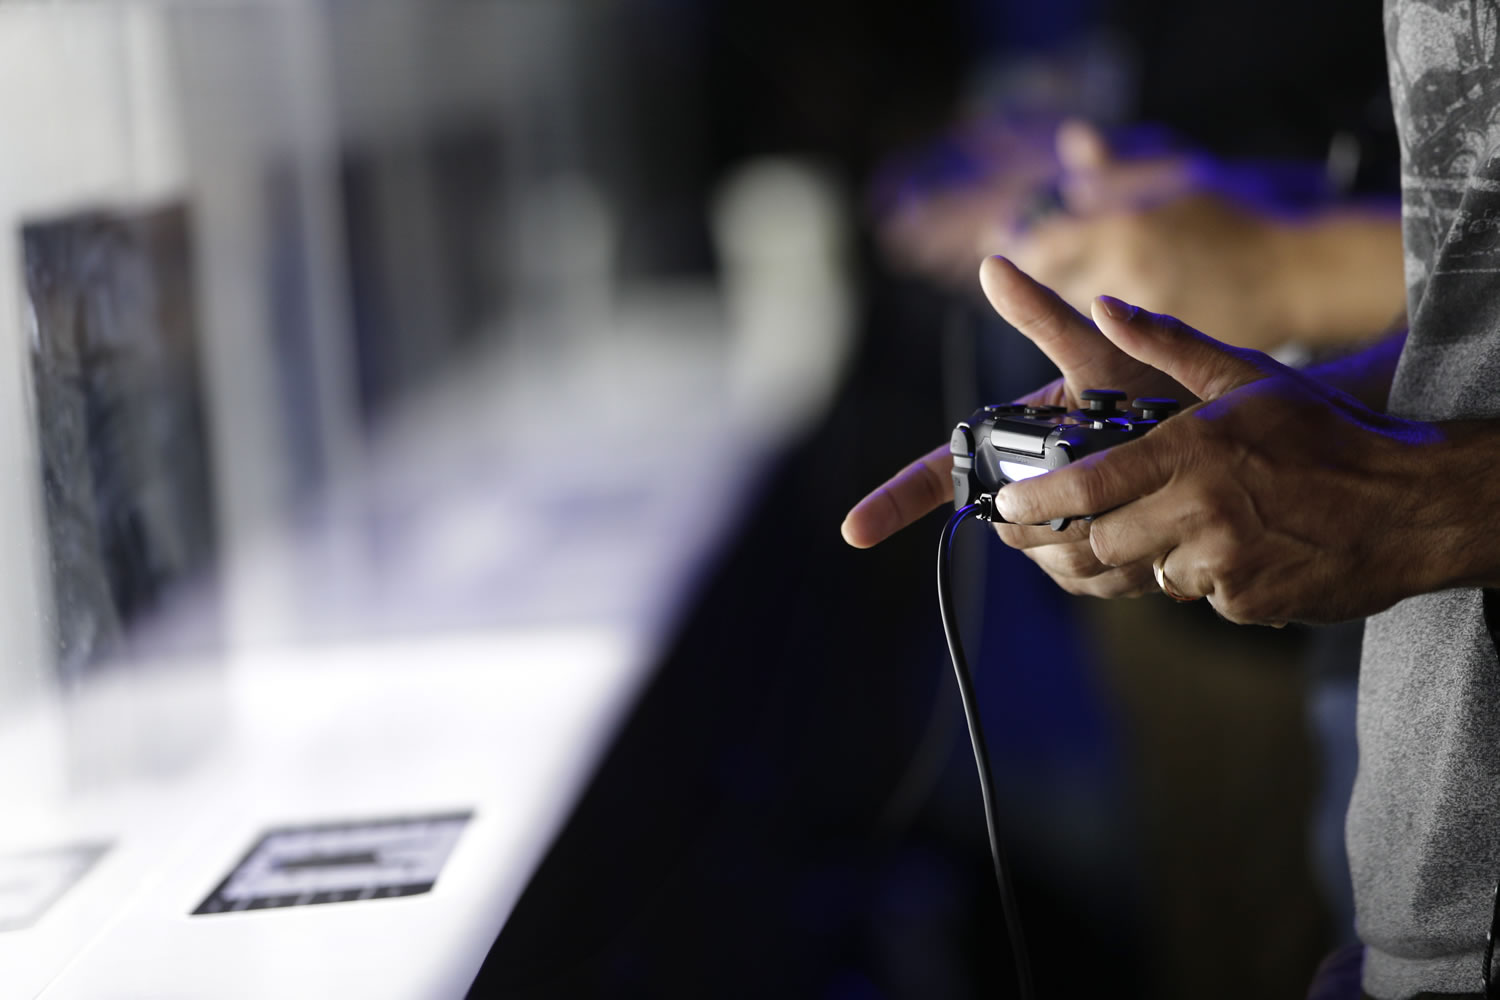 Attendees play video games on the PlayStation 4 at the Sony booth during the Electronic Entertainment Expo in Los Angeles.